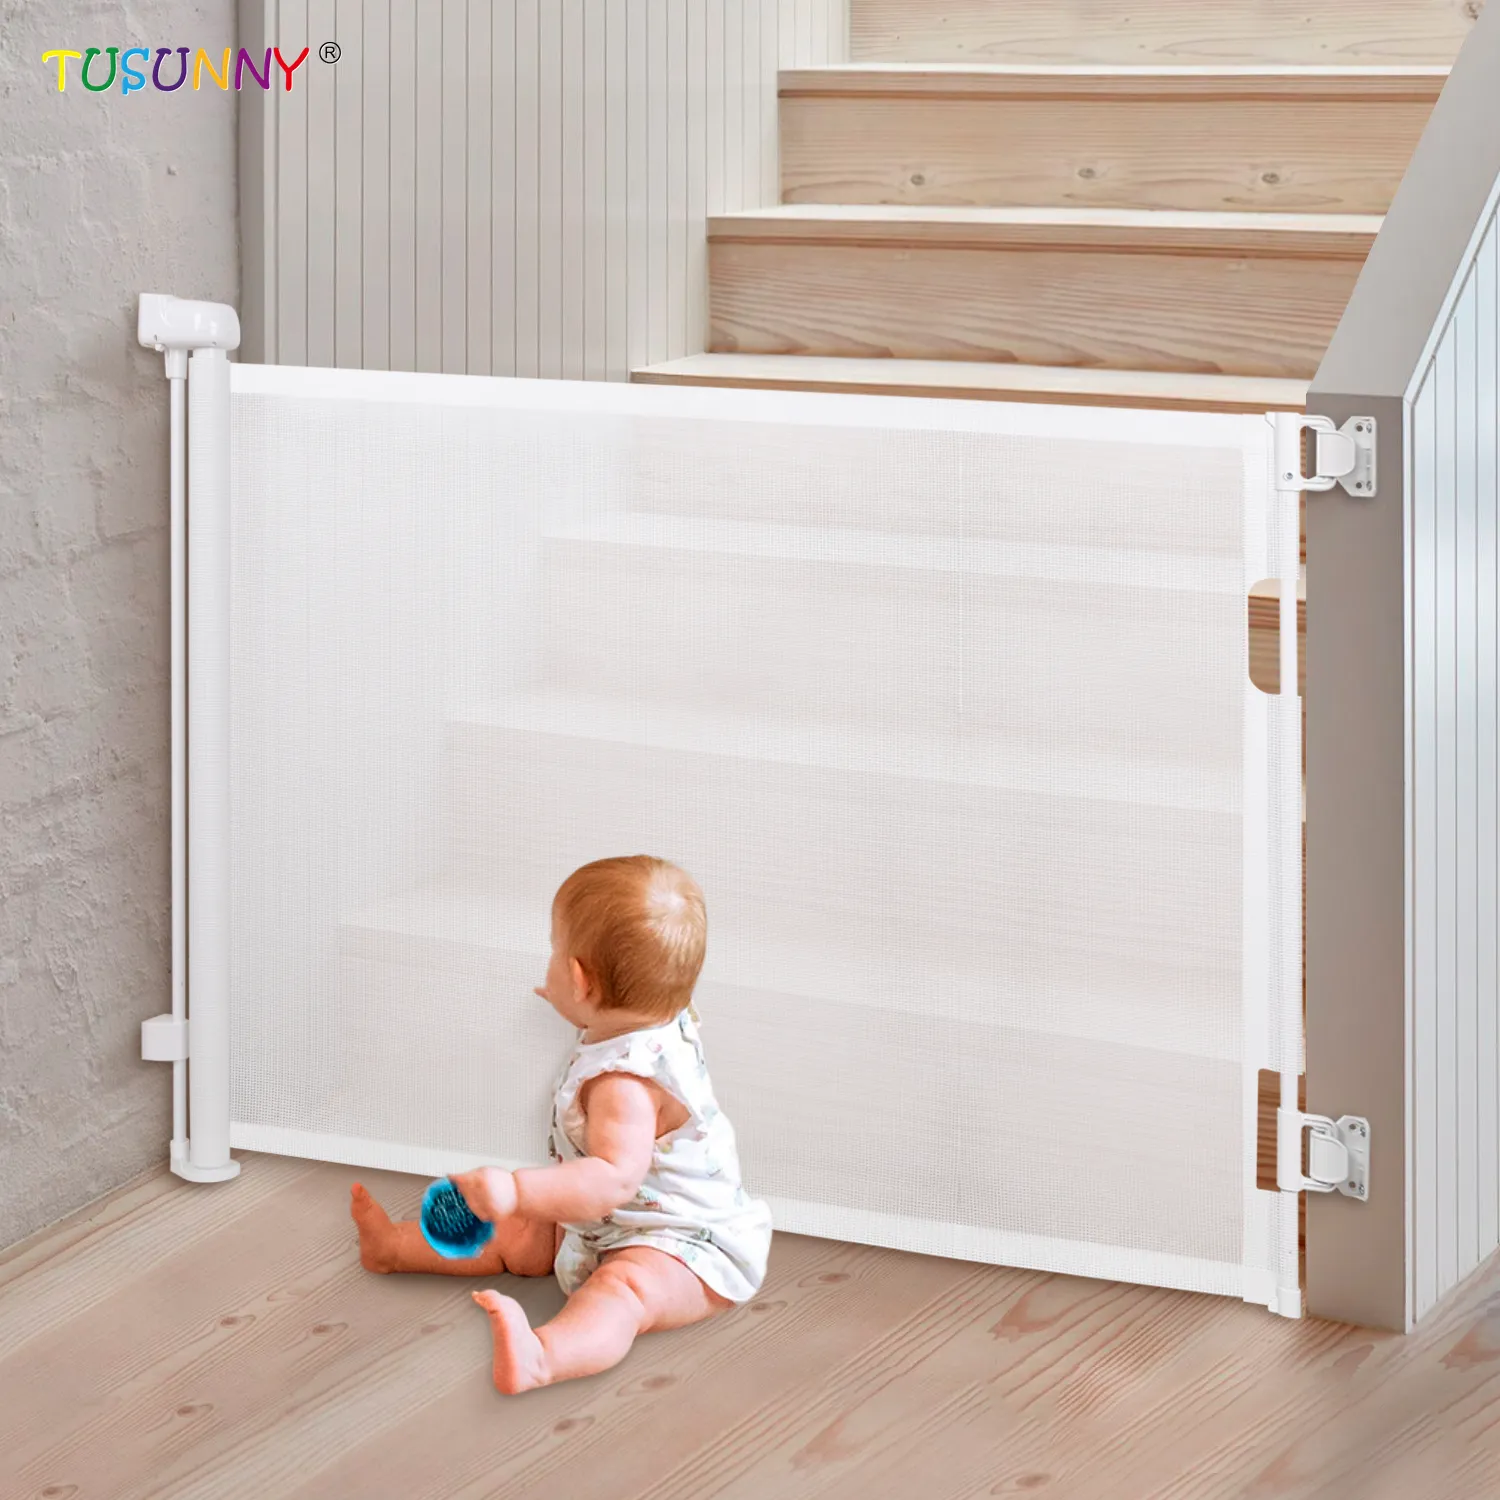 Baby Gates For Doorways Or Stairs - Retractable Safety Gate For Child  Pets  Dog  Puppy Or Cat